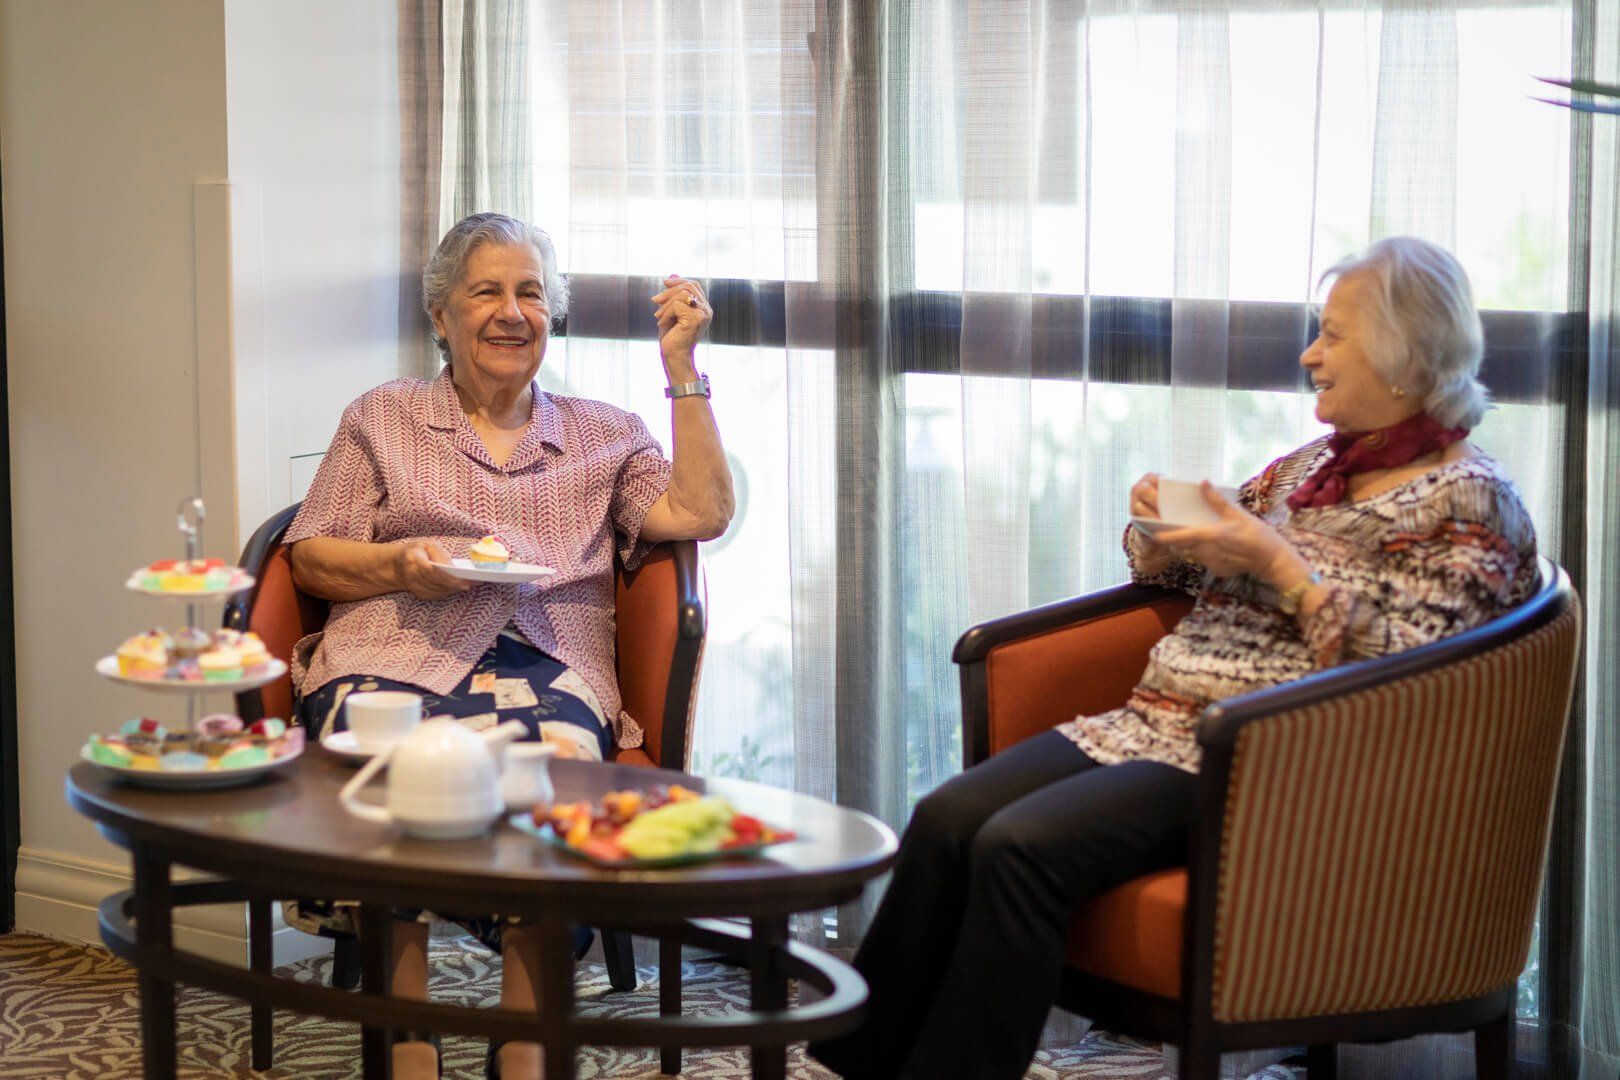 aged care residence having a cup of tea